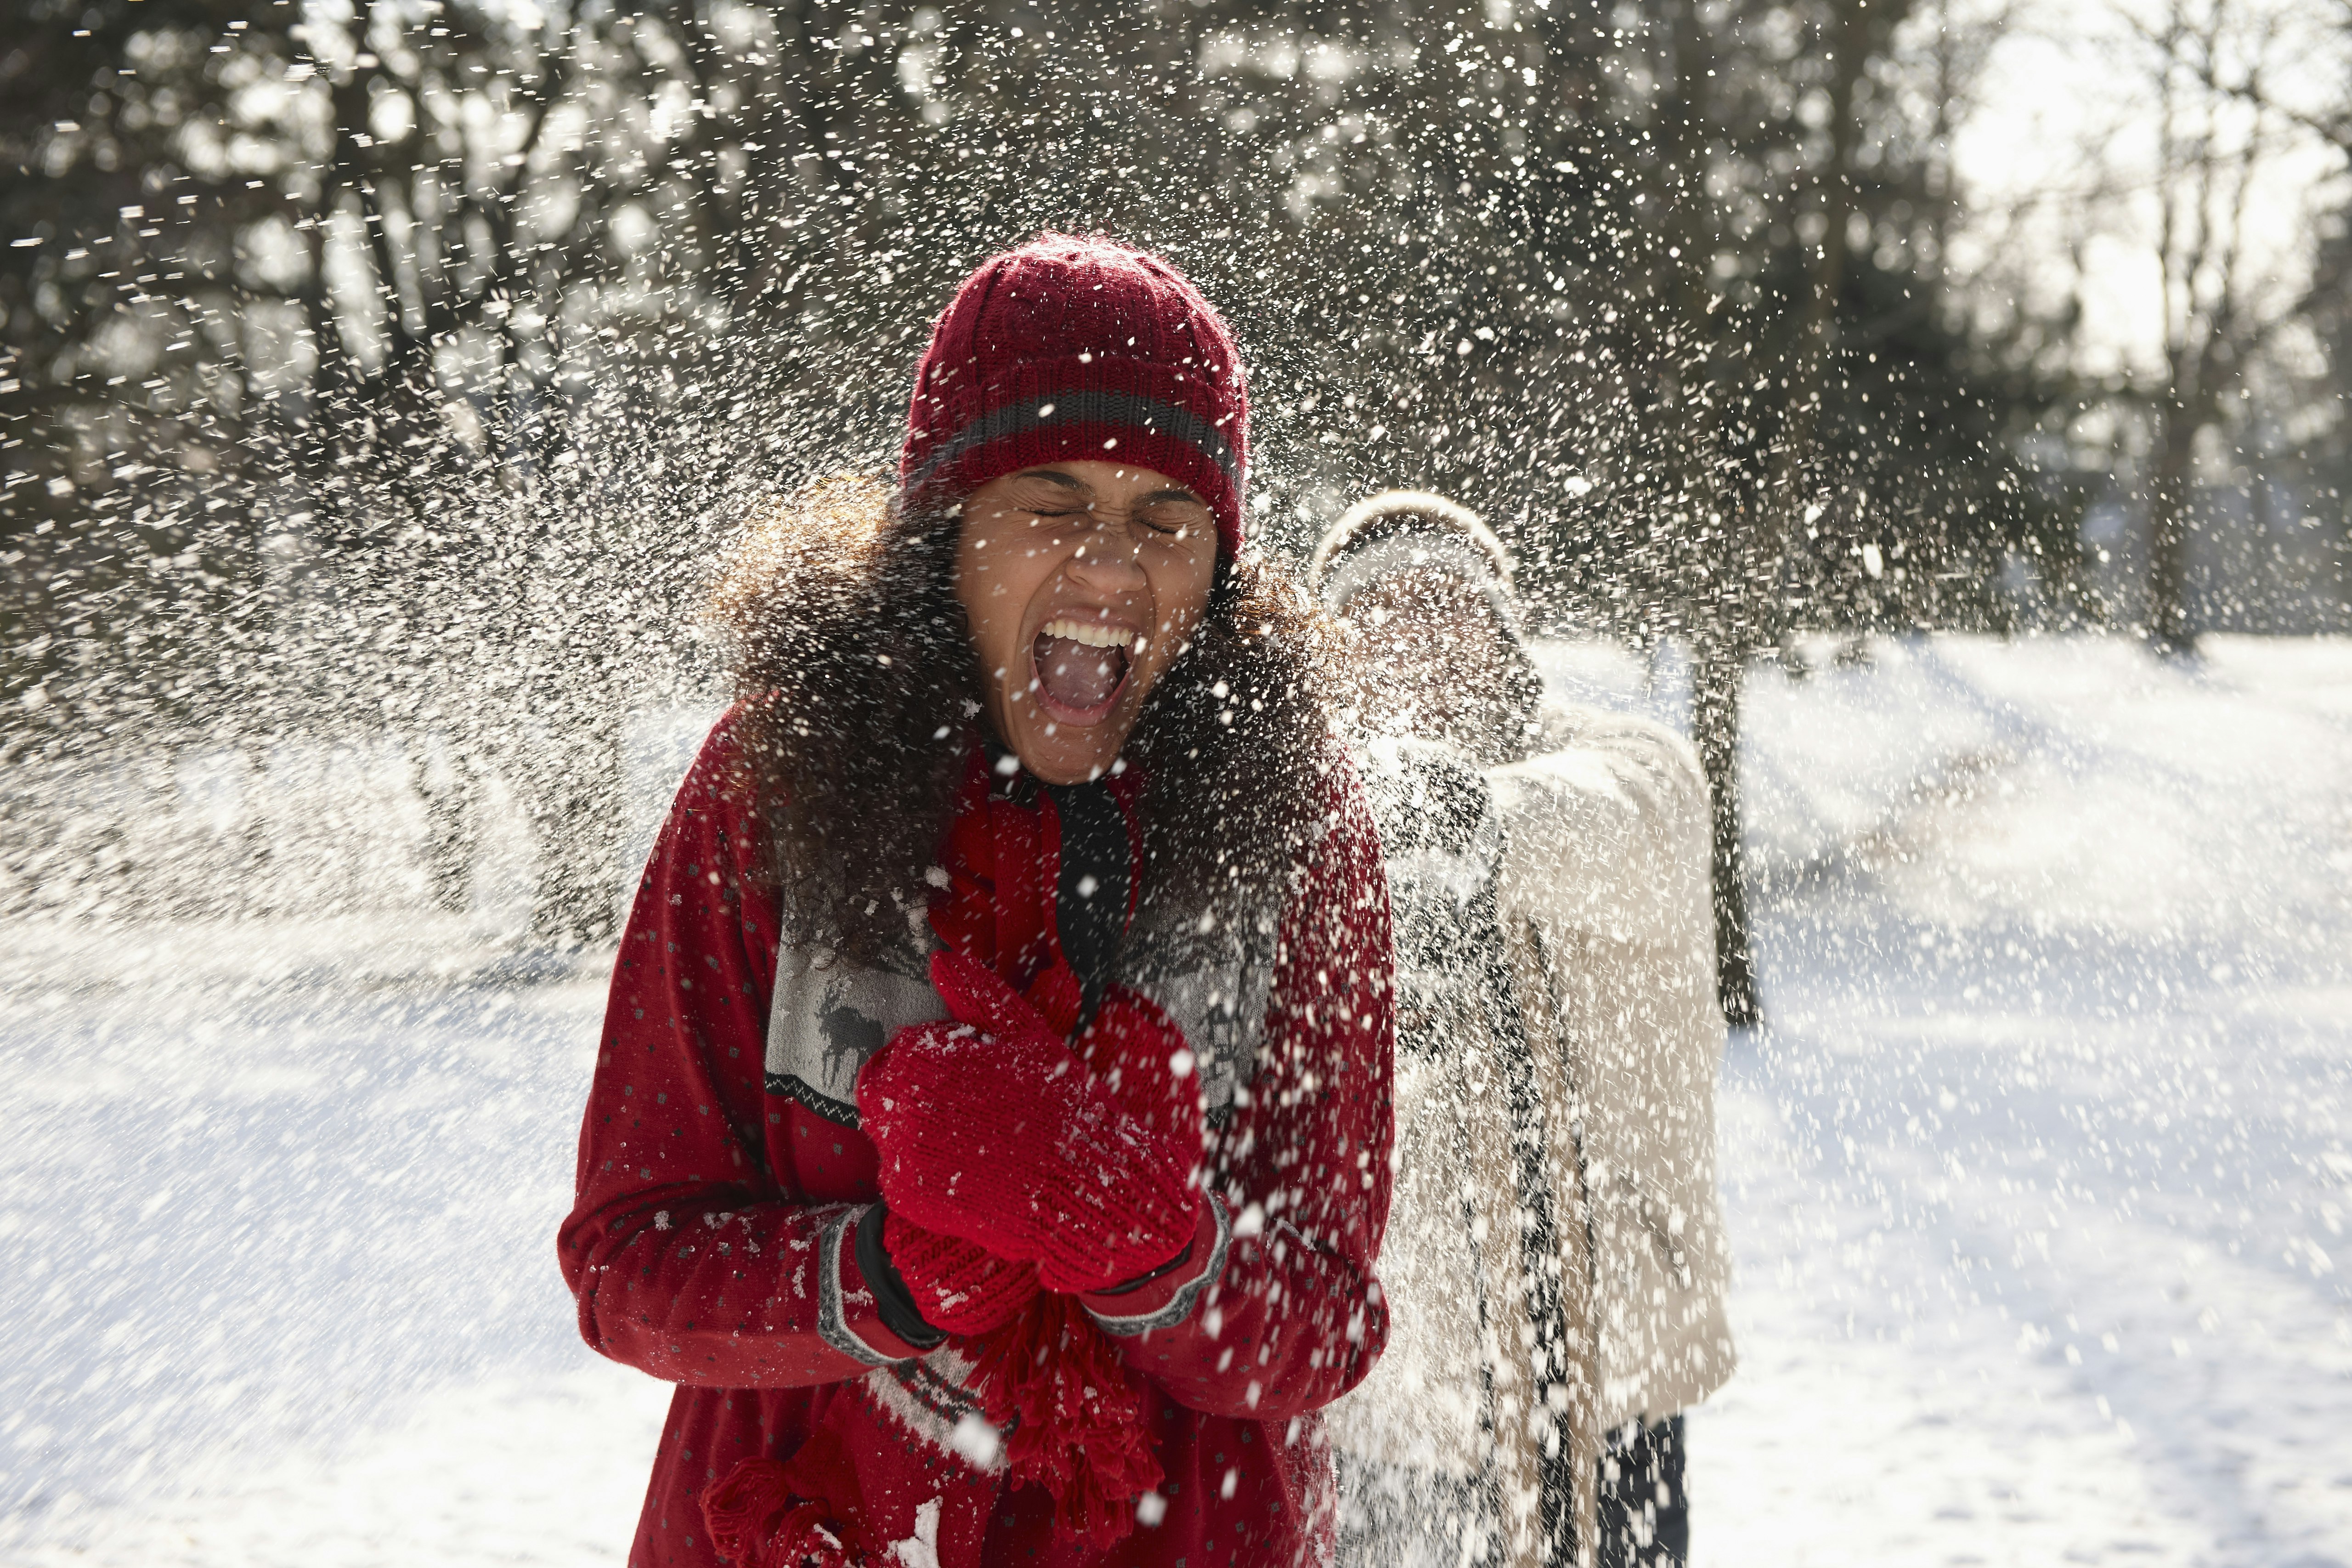 A woman wearing a bright red coat and hat, screams as she's hit with a snowball